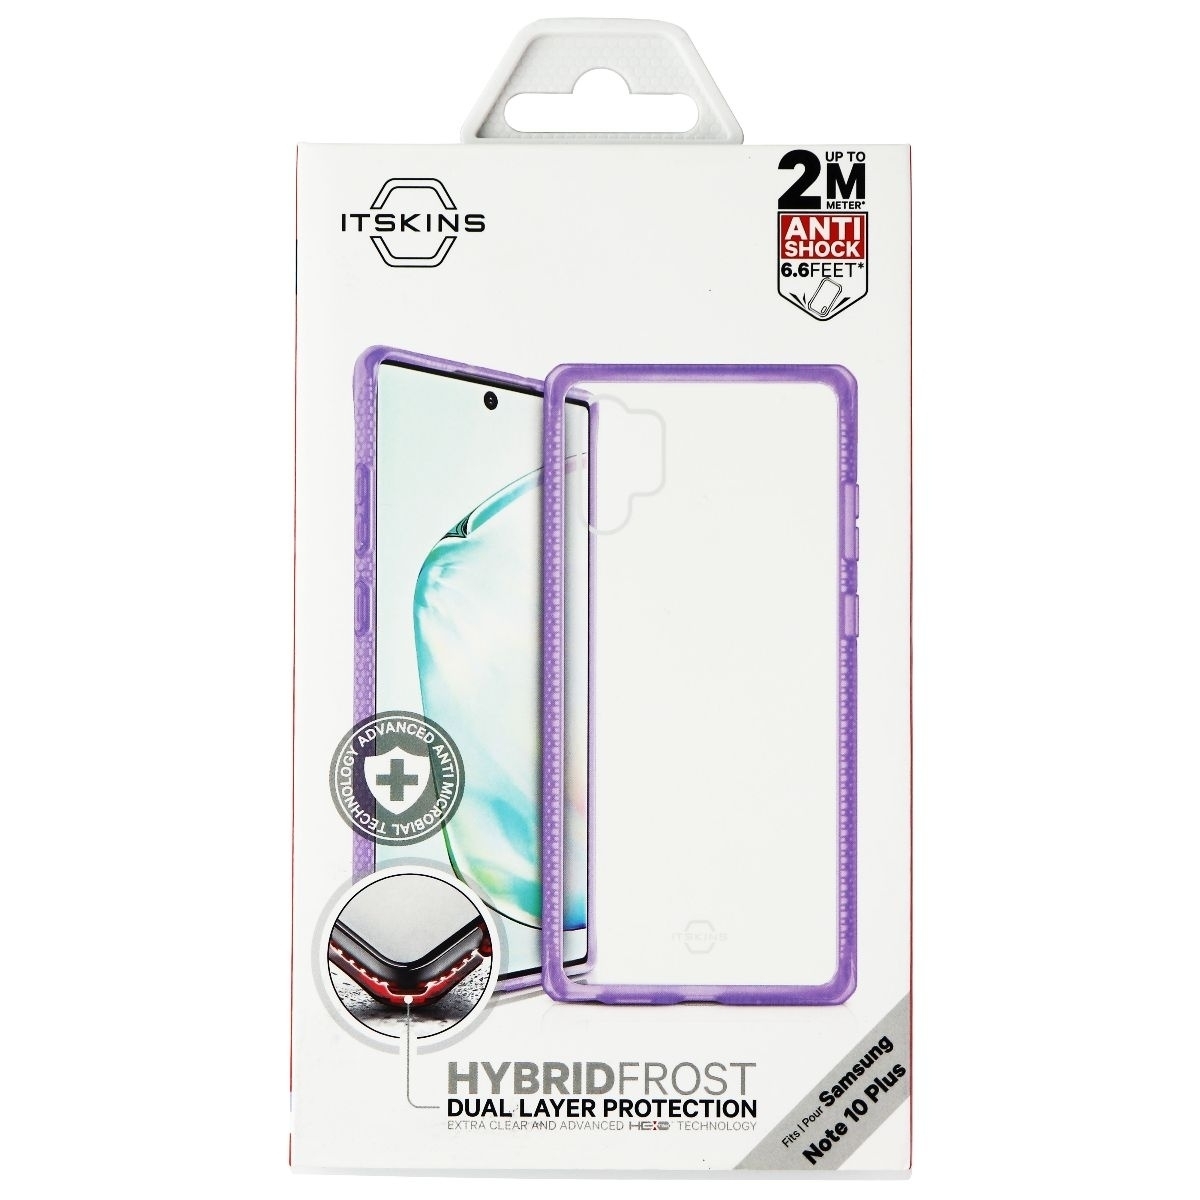 ITSKINS Hybrid Frost Hard Case For Samsung Galaxy (Note10+) - Purple/Clear